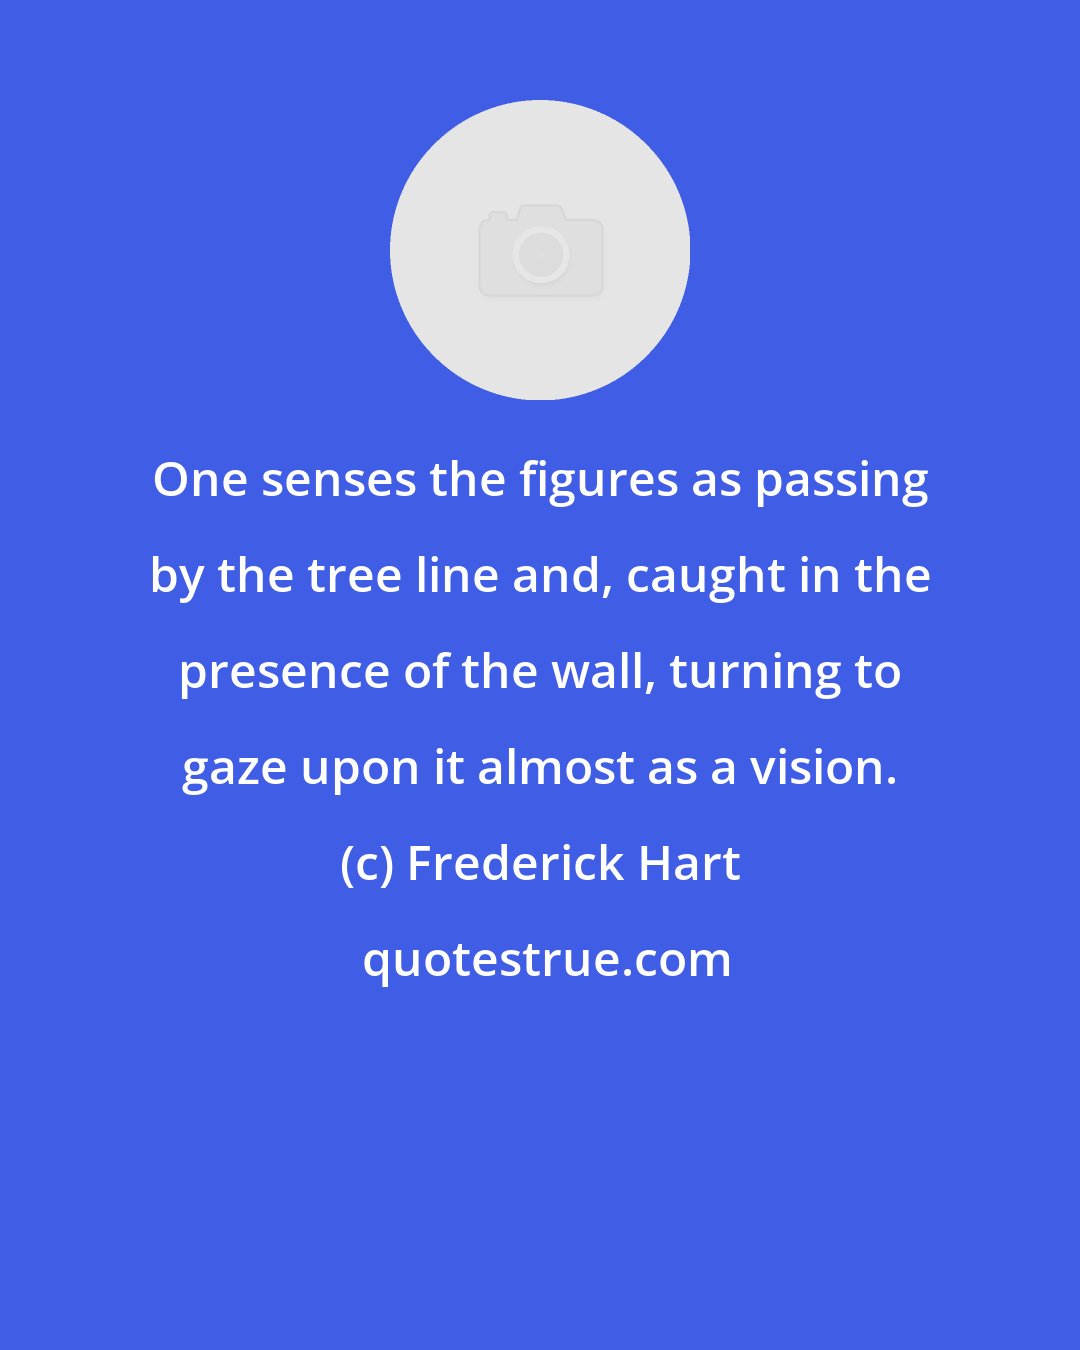 Frederick Hart: One senses the figures as passing by the tree line and, caught in the presence of the wall, turning to gaze upon it almost as a vision.